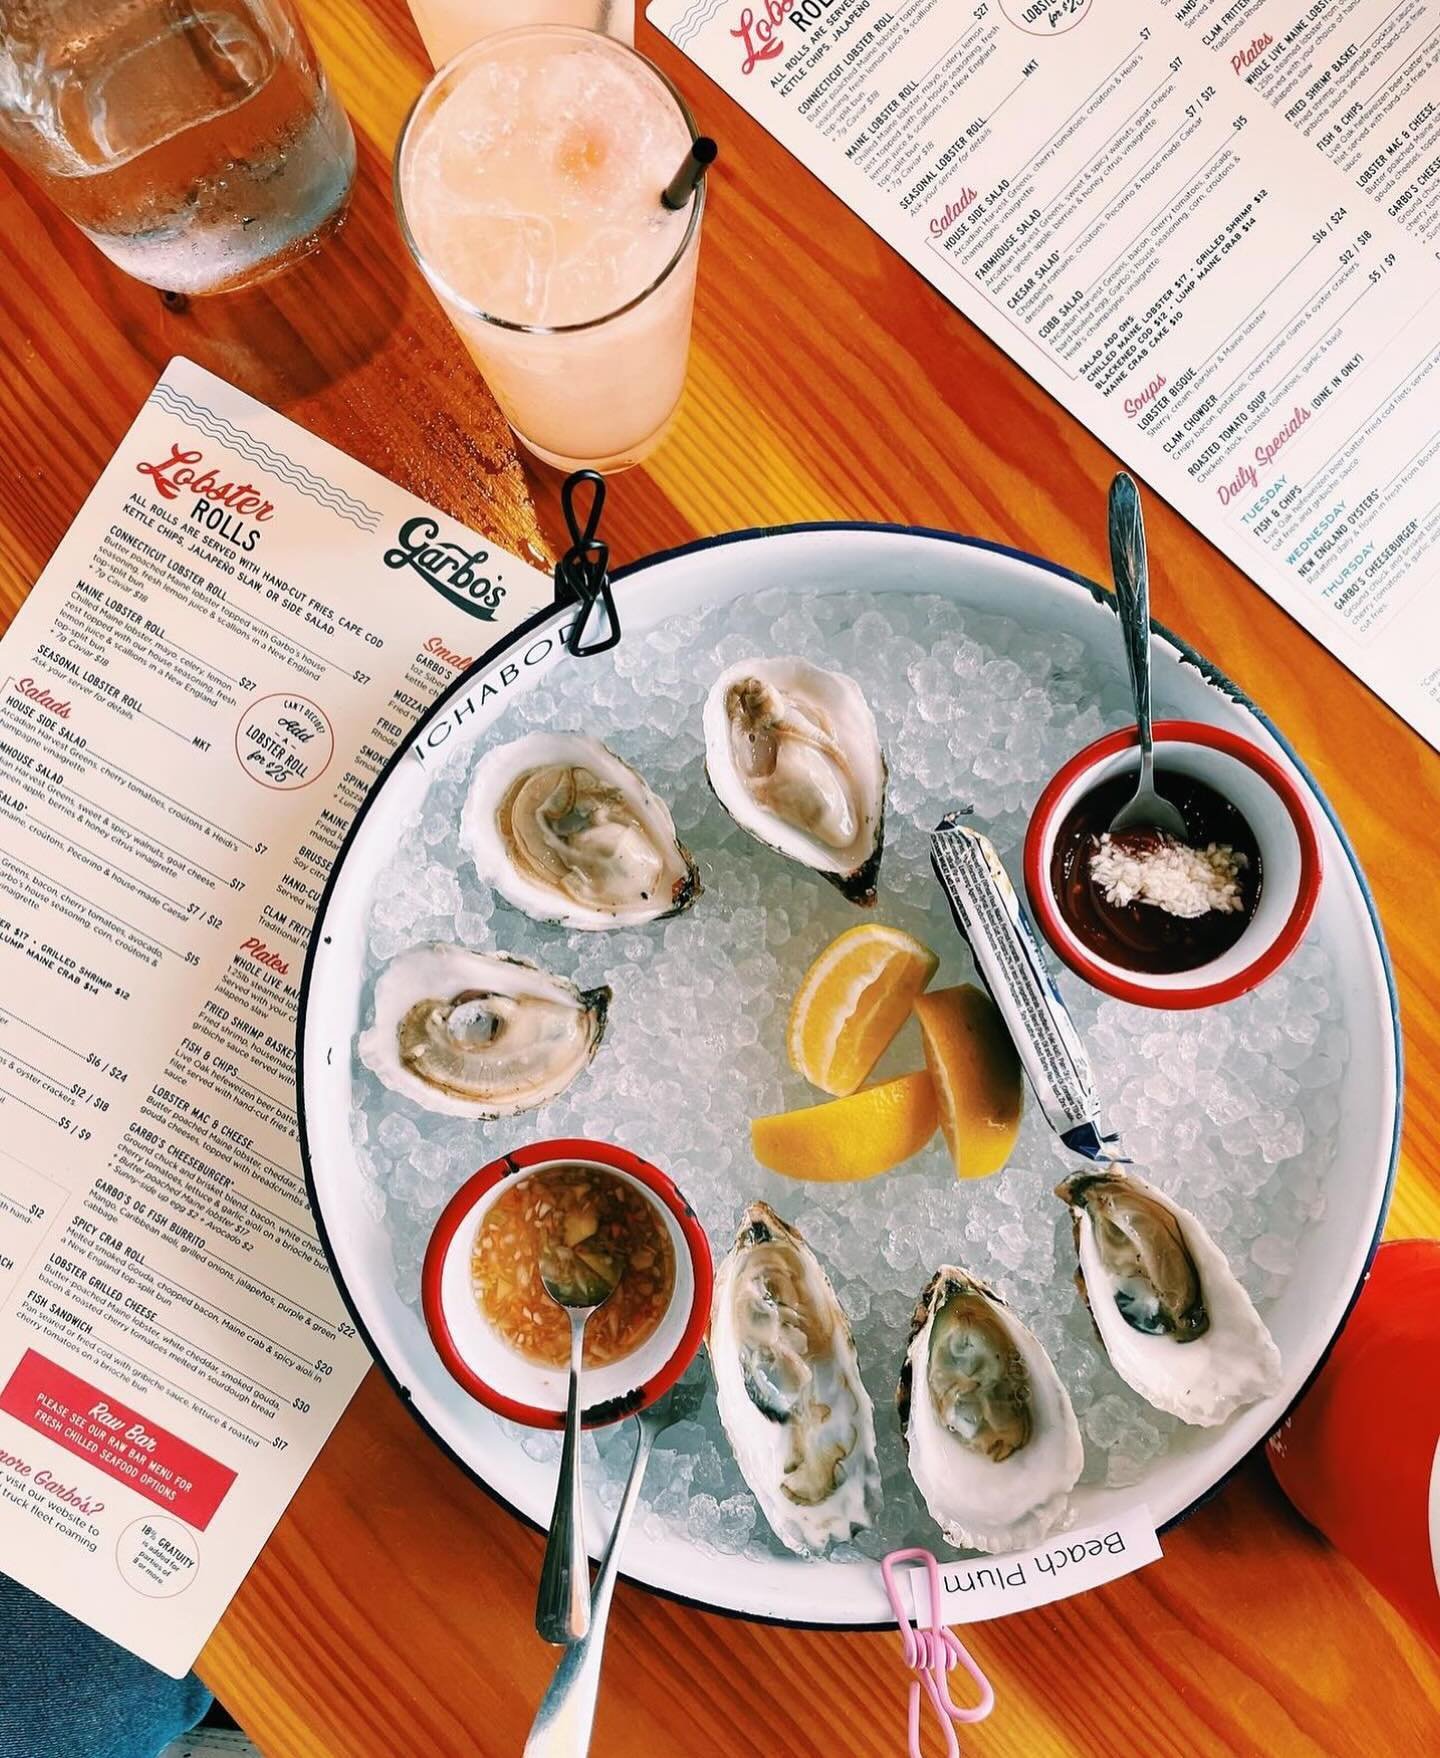 Get your lemons ready! 🍋 tomorrow is Wednesday (aka $1 off all oysters all day loooong) 

Mopac &amp; Lamar &mdash; see you there
Thank you for the photos❤️ @shelbysorrel